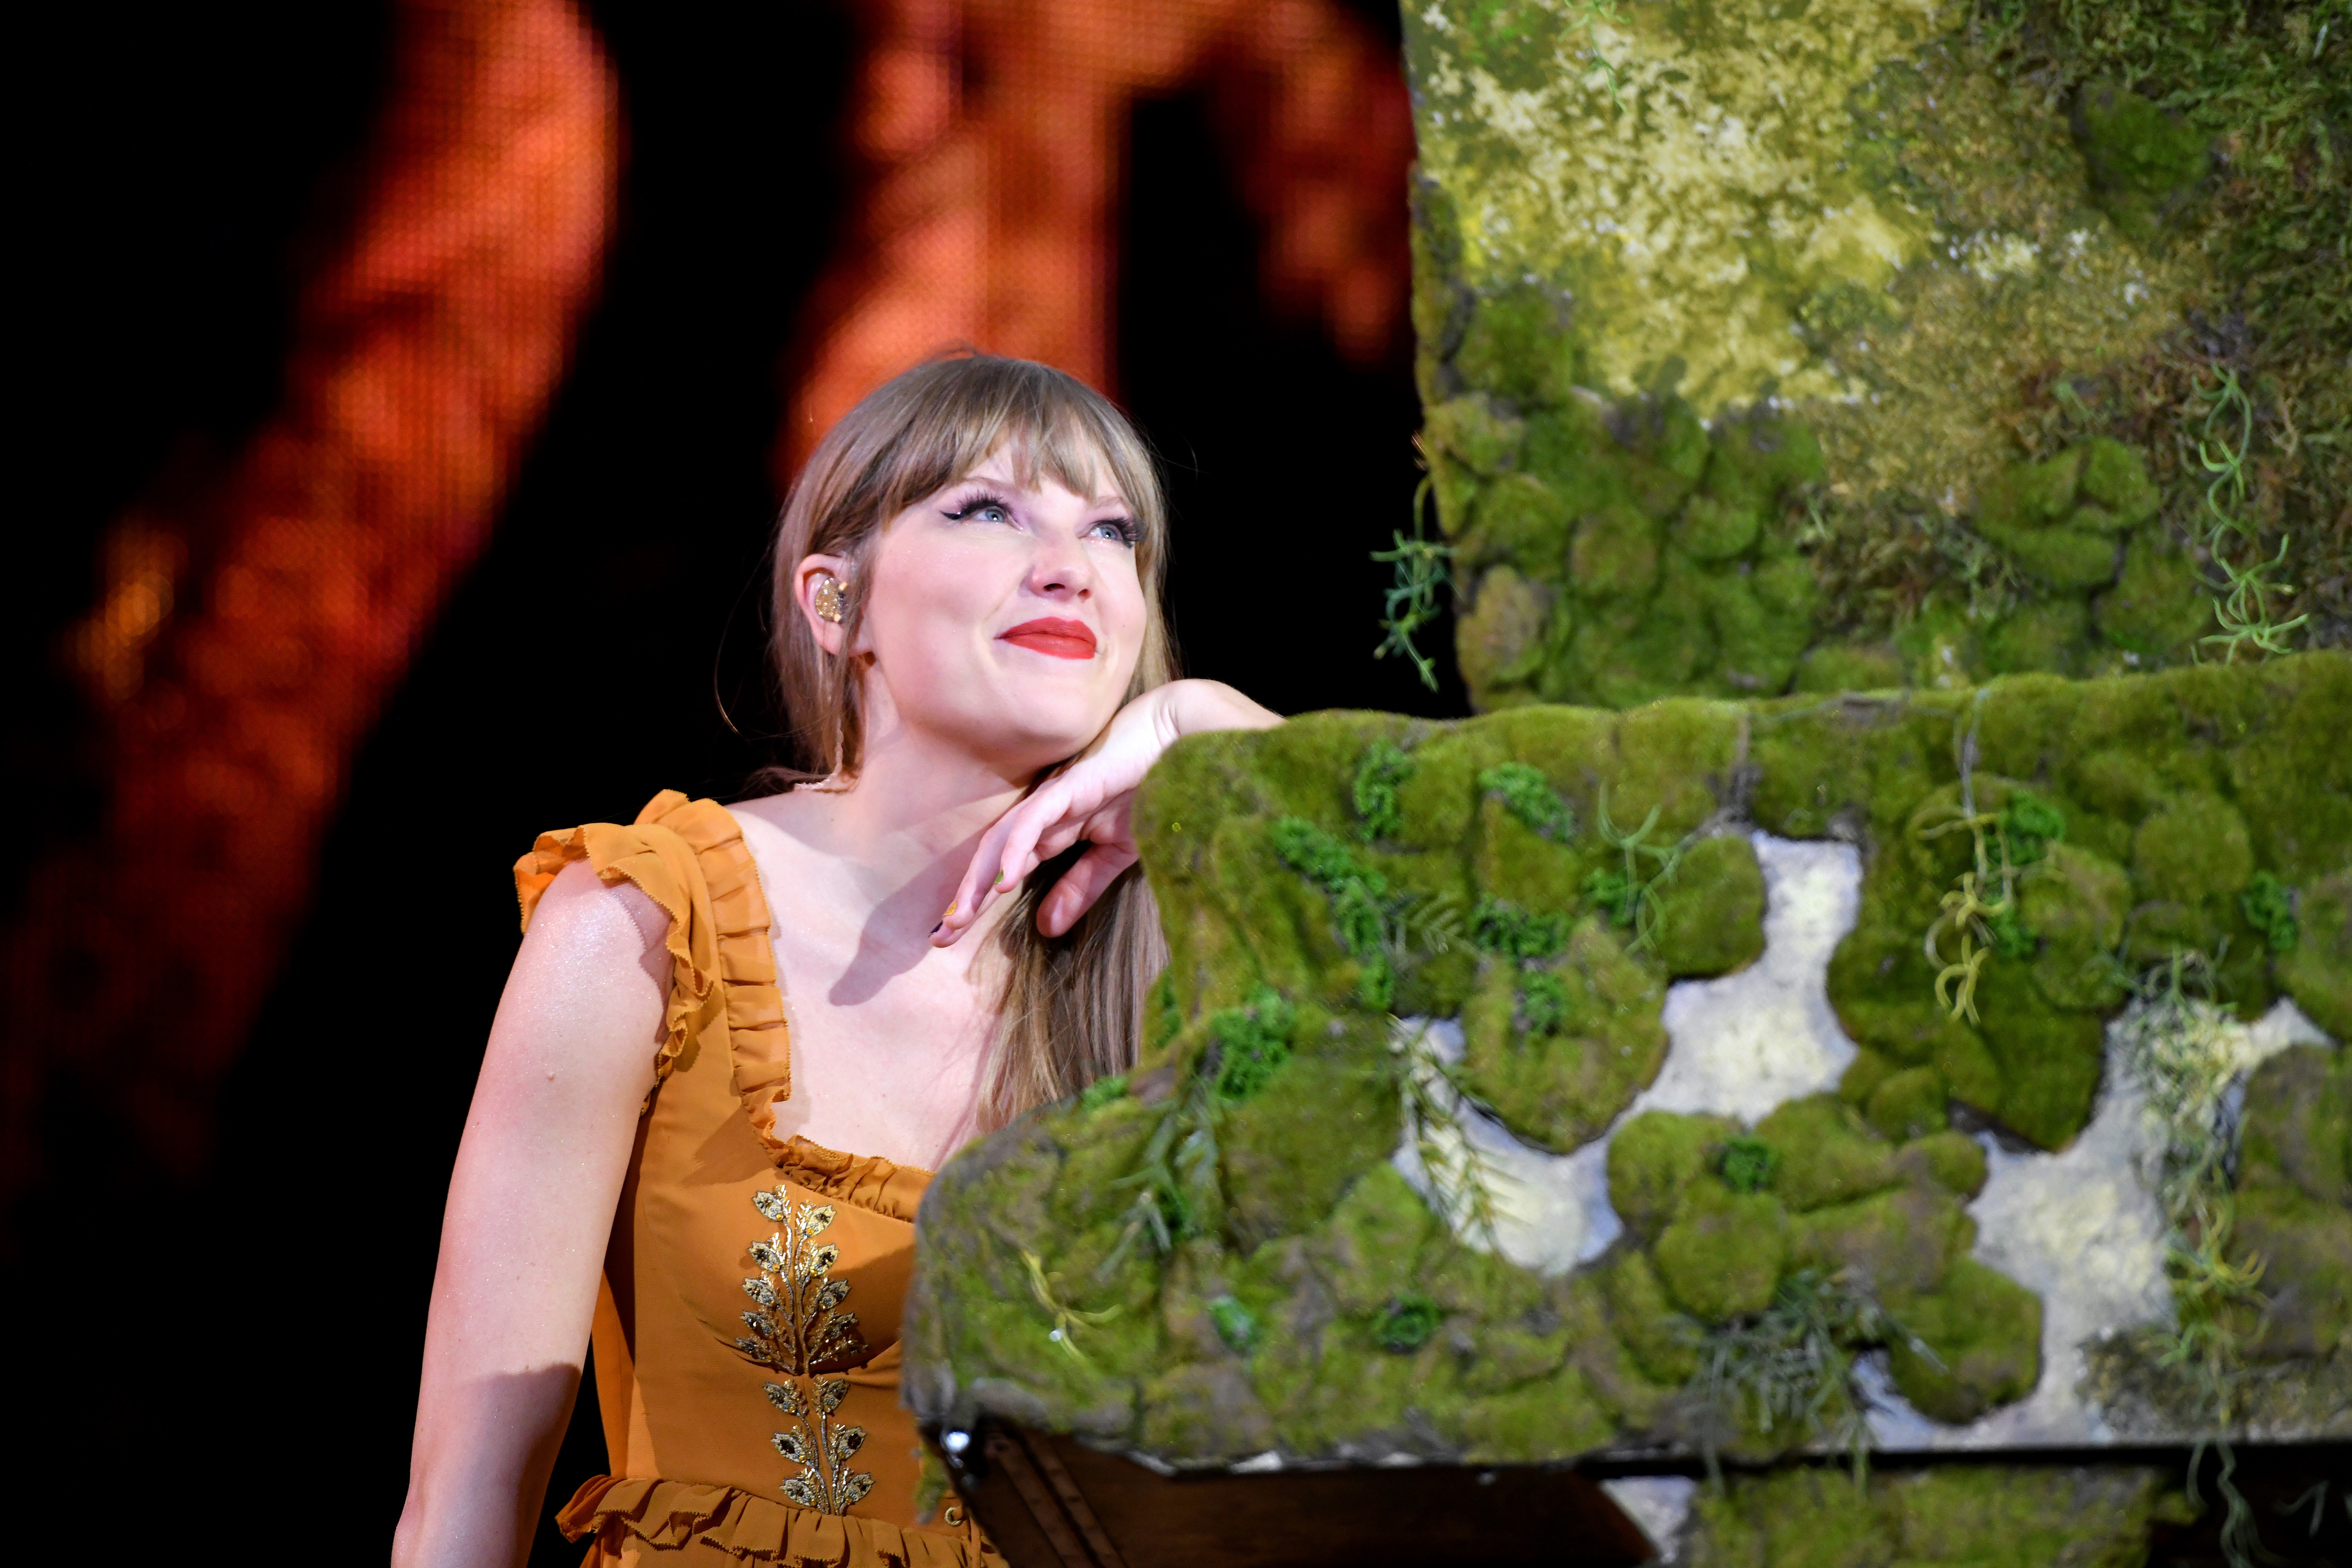 Taylor smiling and leaning against a verdant shelf